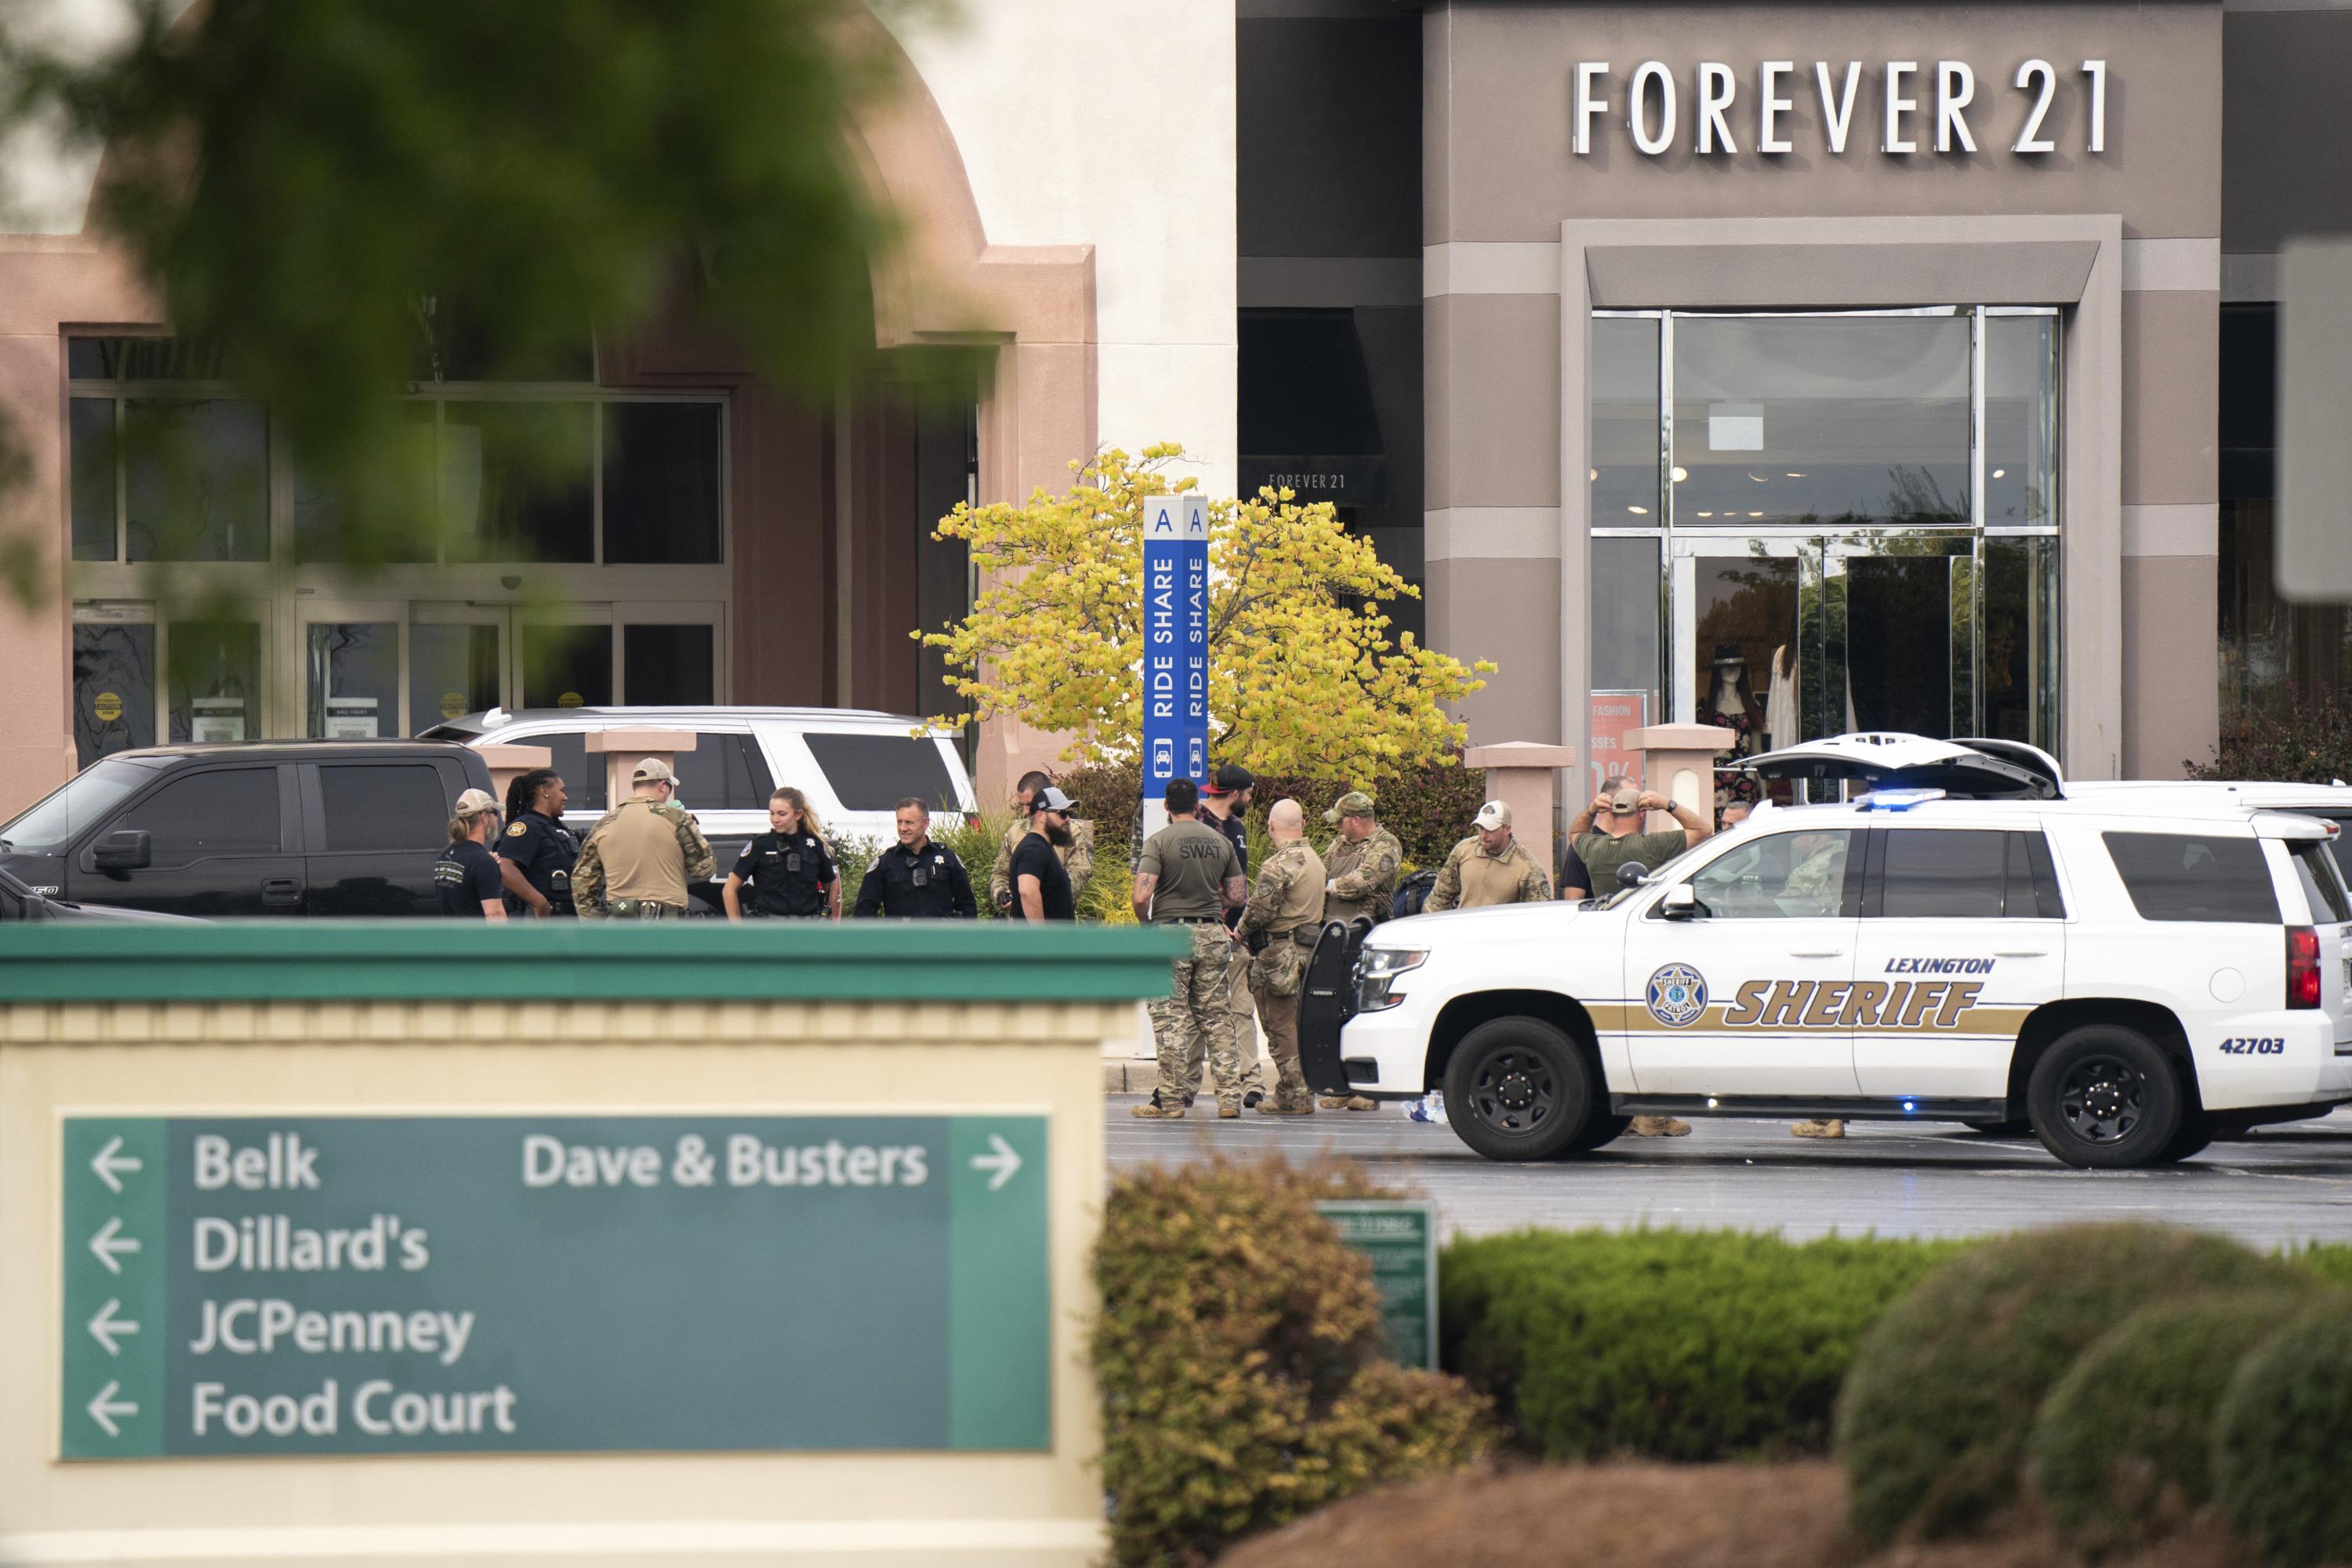 US rocked by 3 mass shootings during Easter weekend; 2 dead – The Associated Press